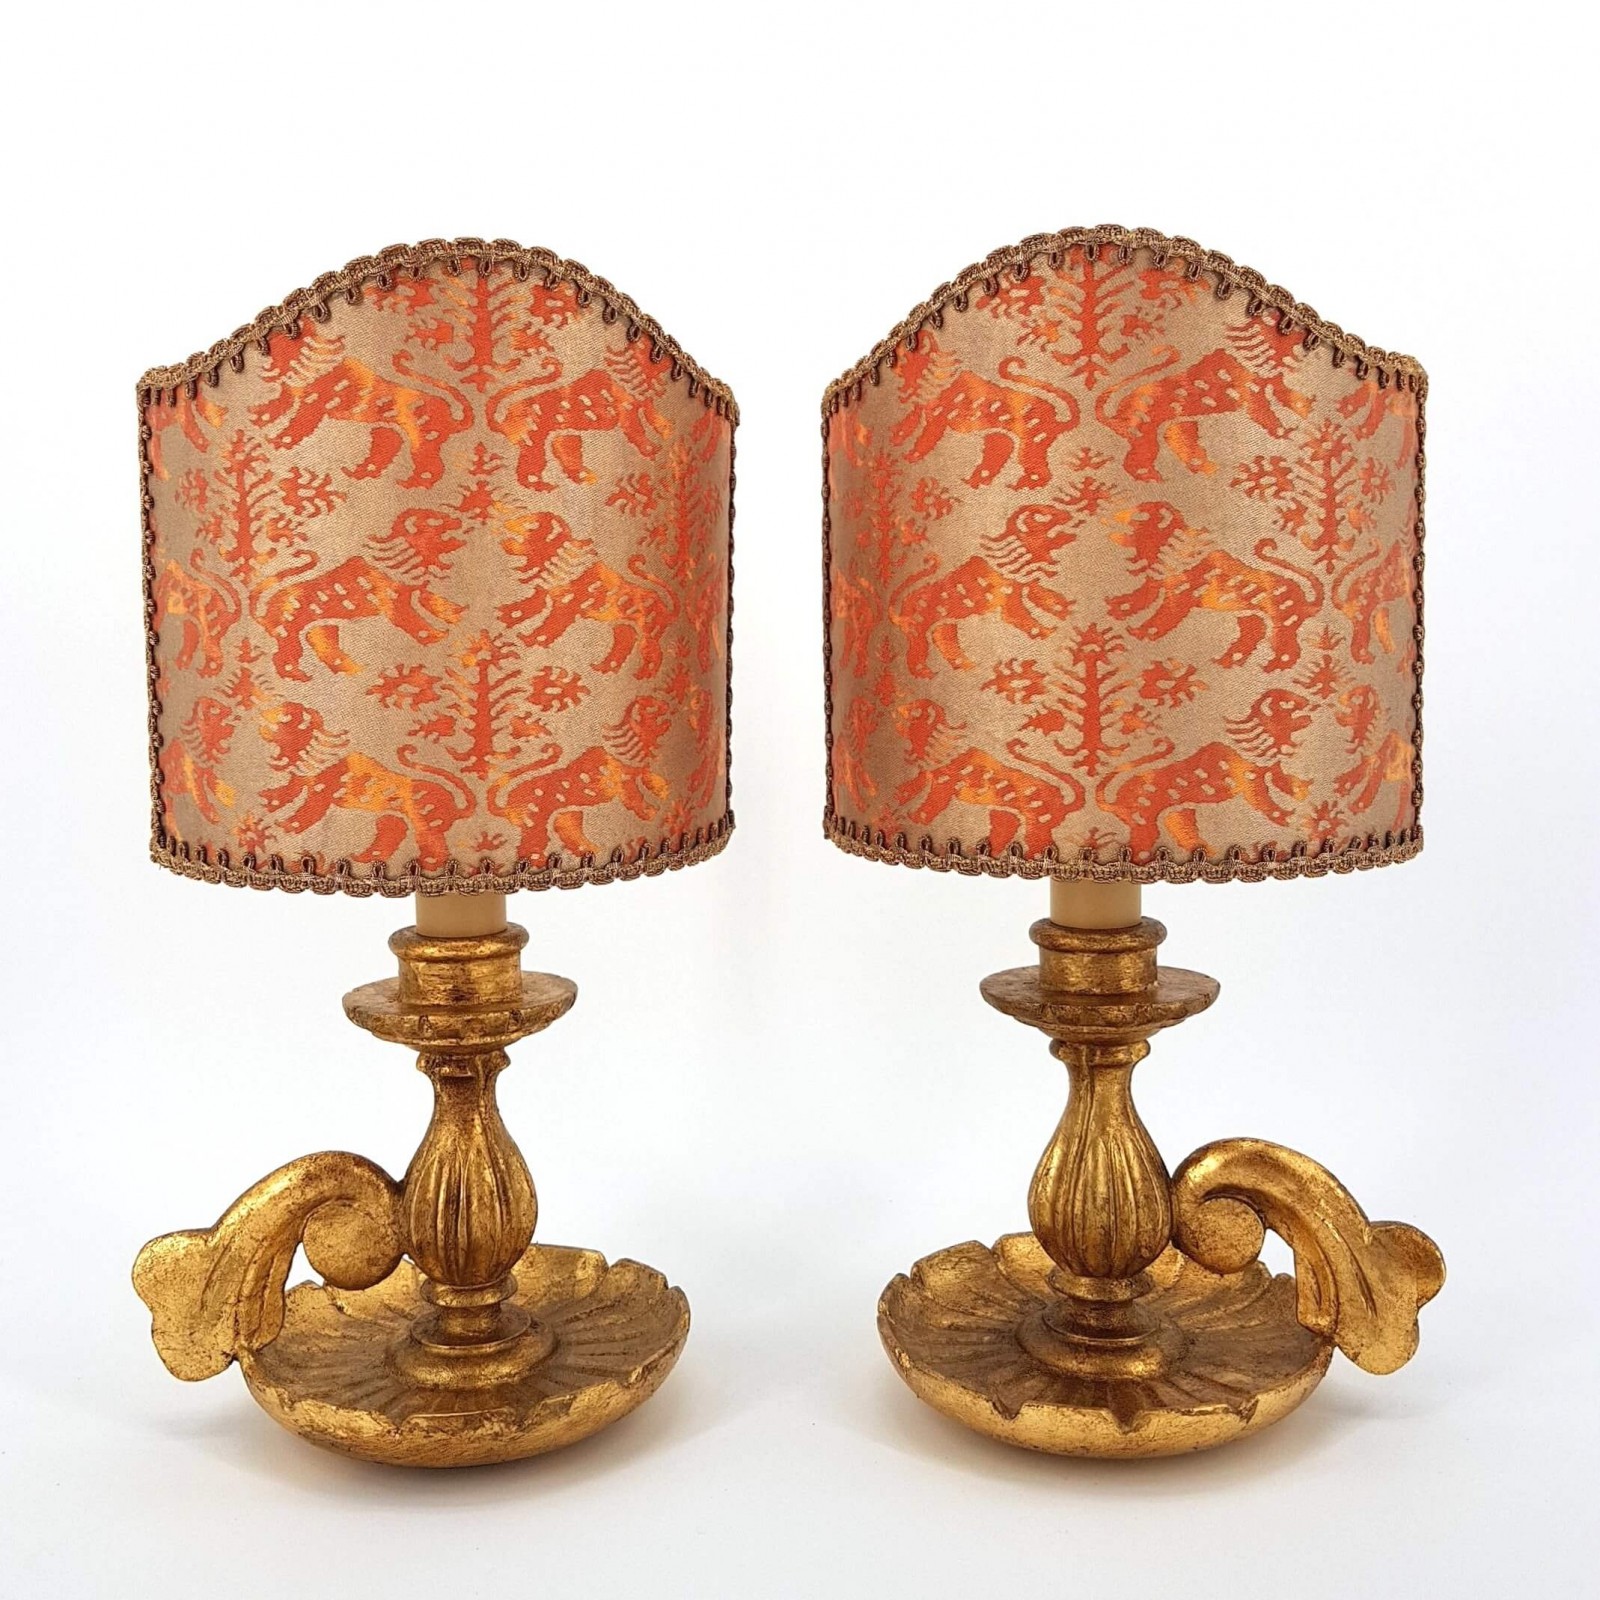 Pair Of Antique Italian Gilt Carved, Wooden Candlestick Table Lamps